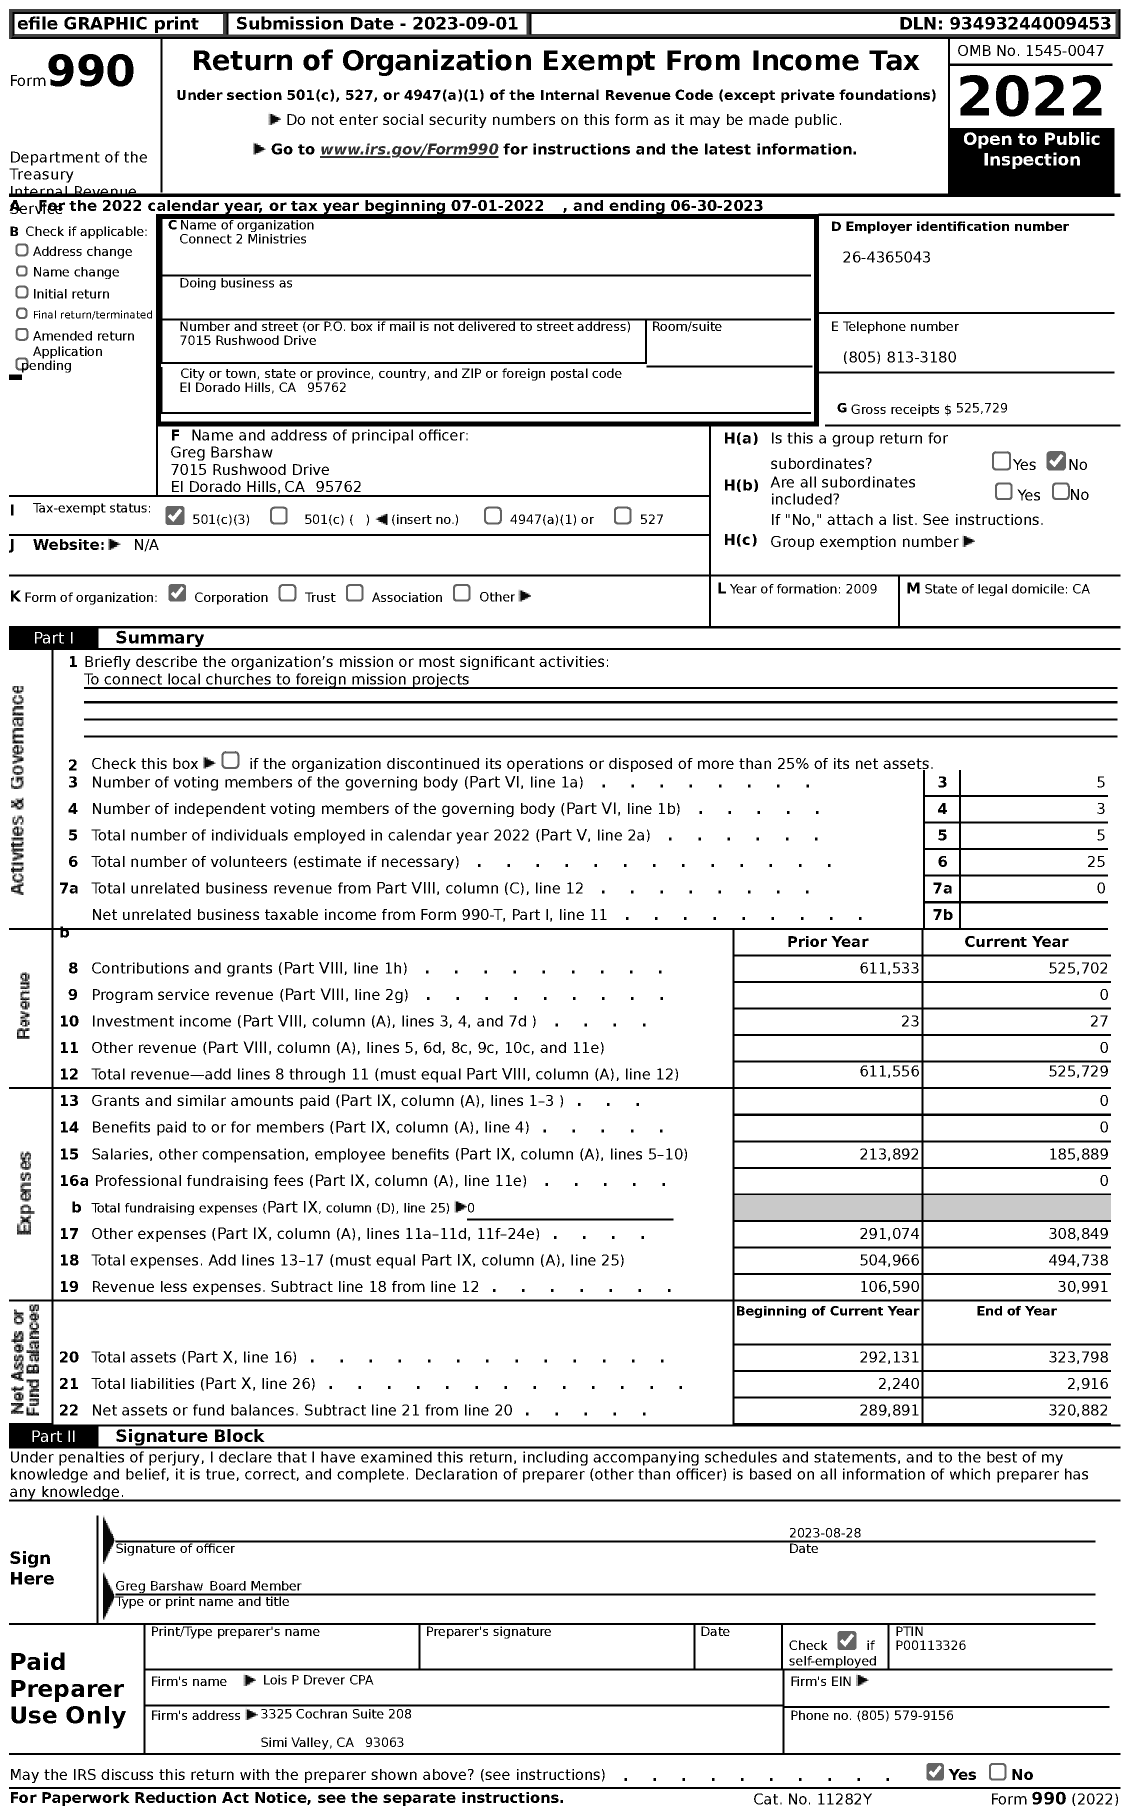 Image of first page of 2022 Form 990 for Connect 2 Ministries